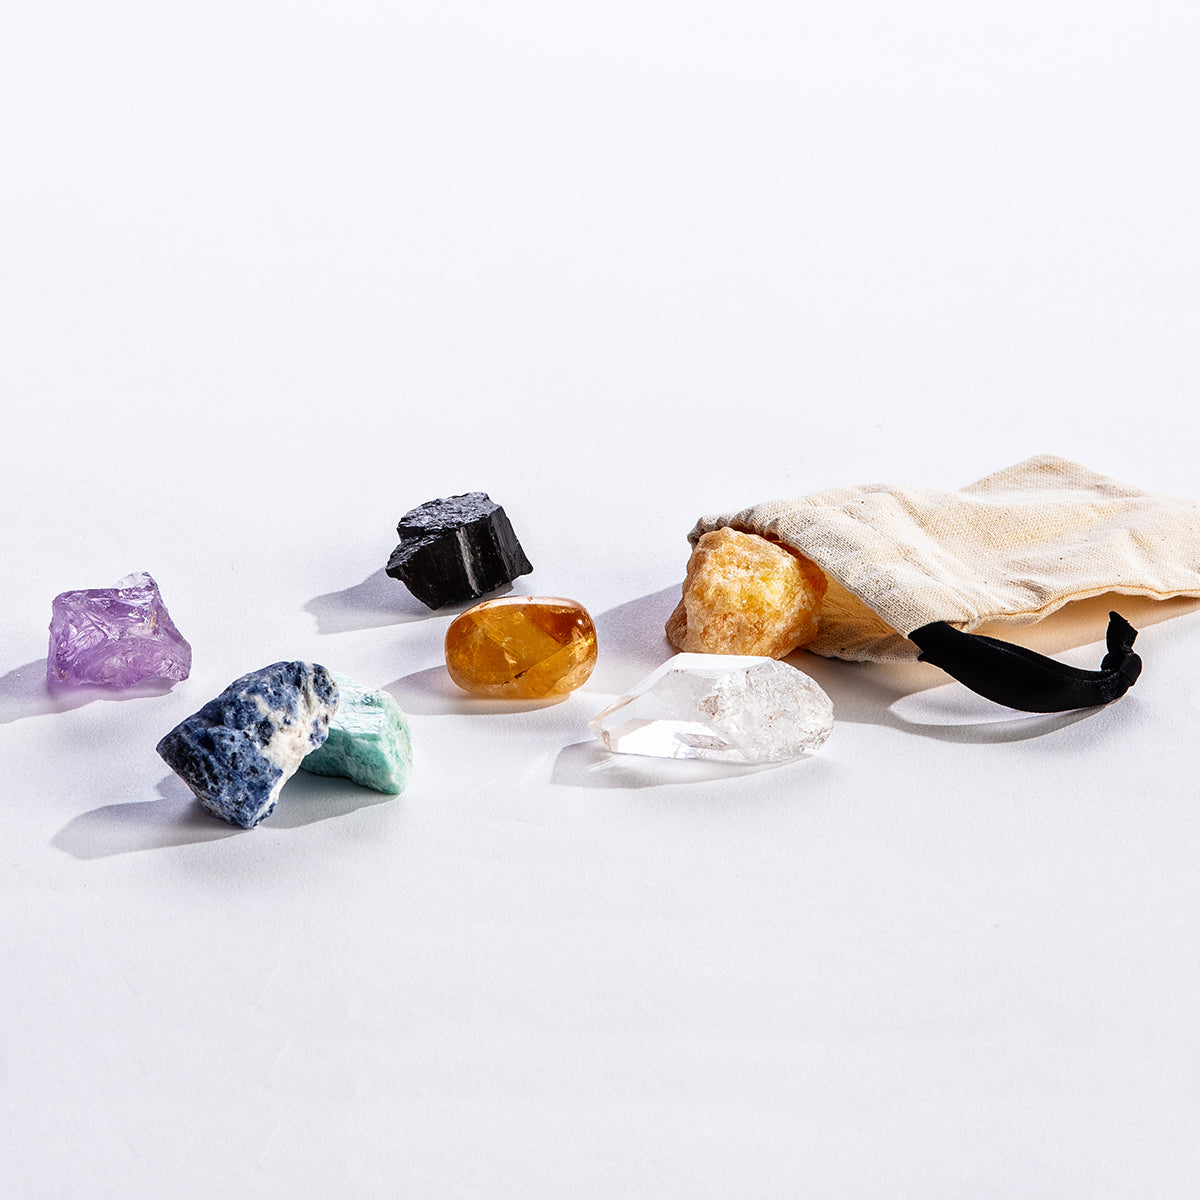 Chakra Collection Crystal Reveal Box